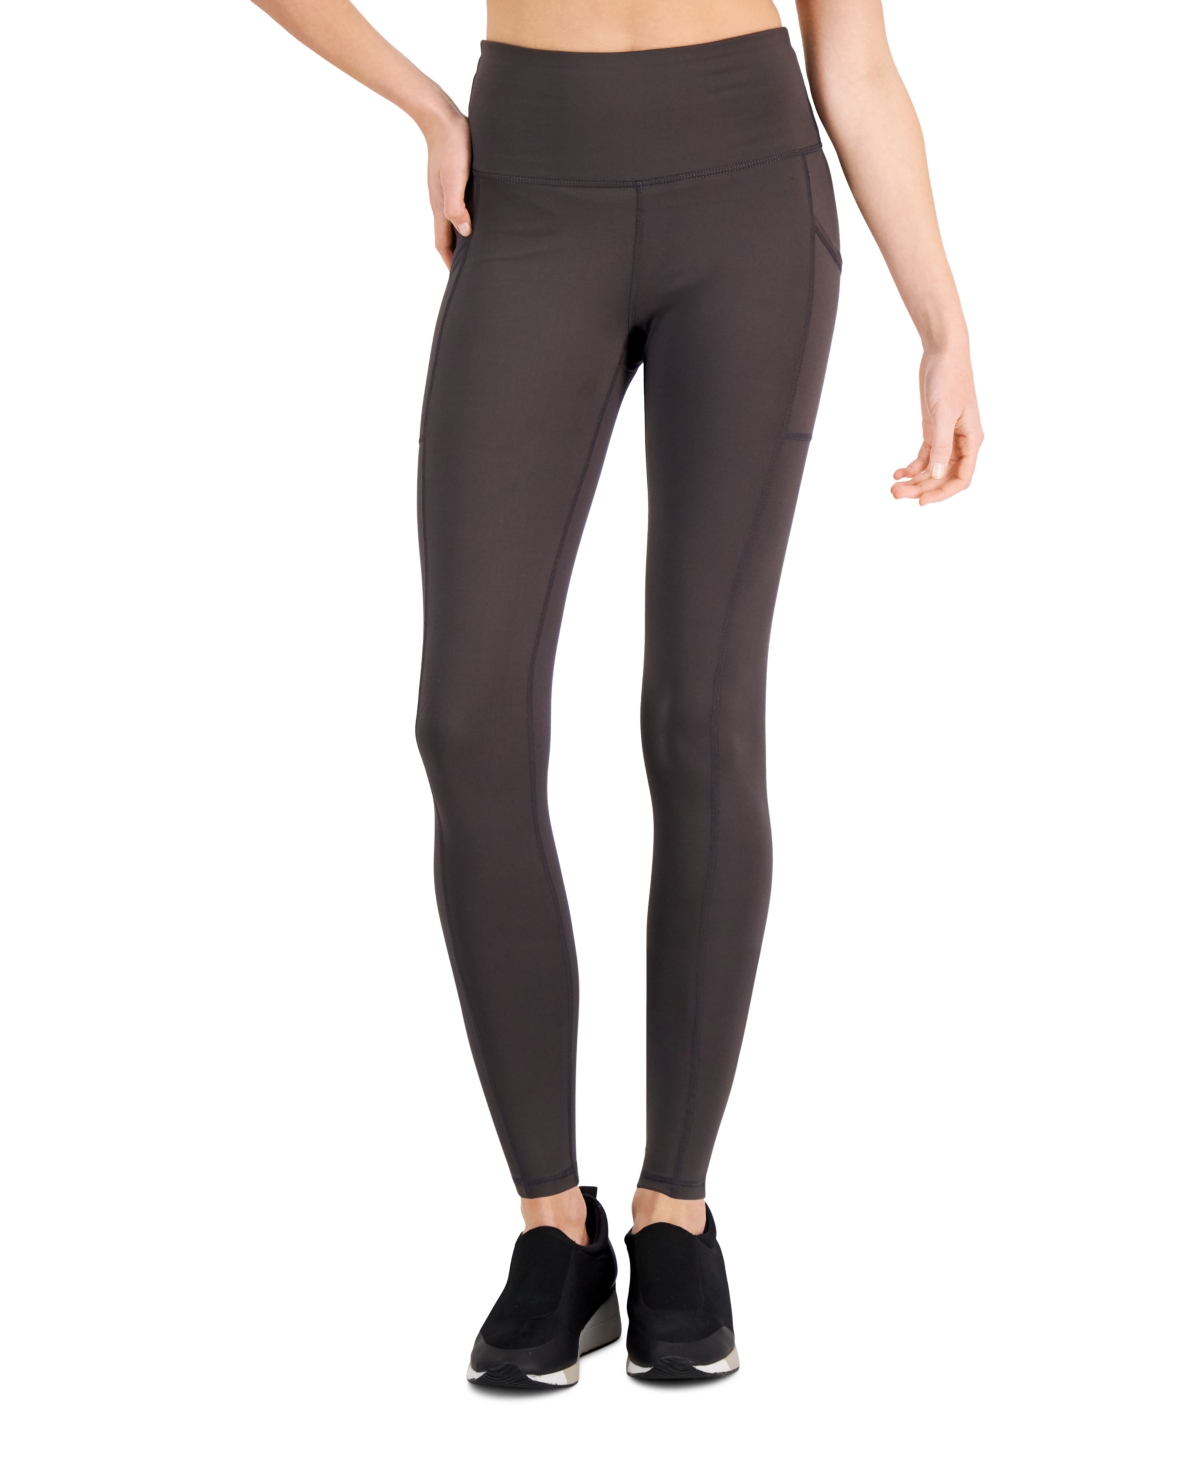 Women's Compression Pocket Full-Length Leggings, Created for Macy's - Deep Charcoal